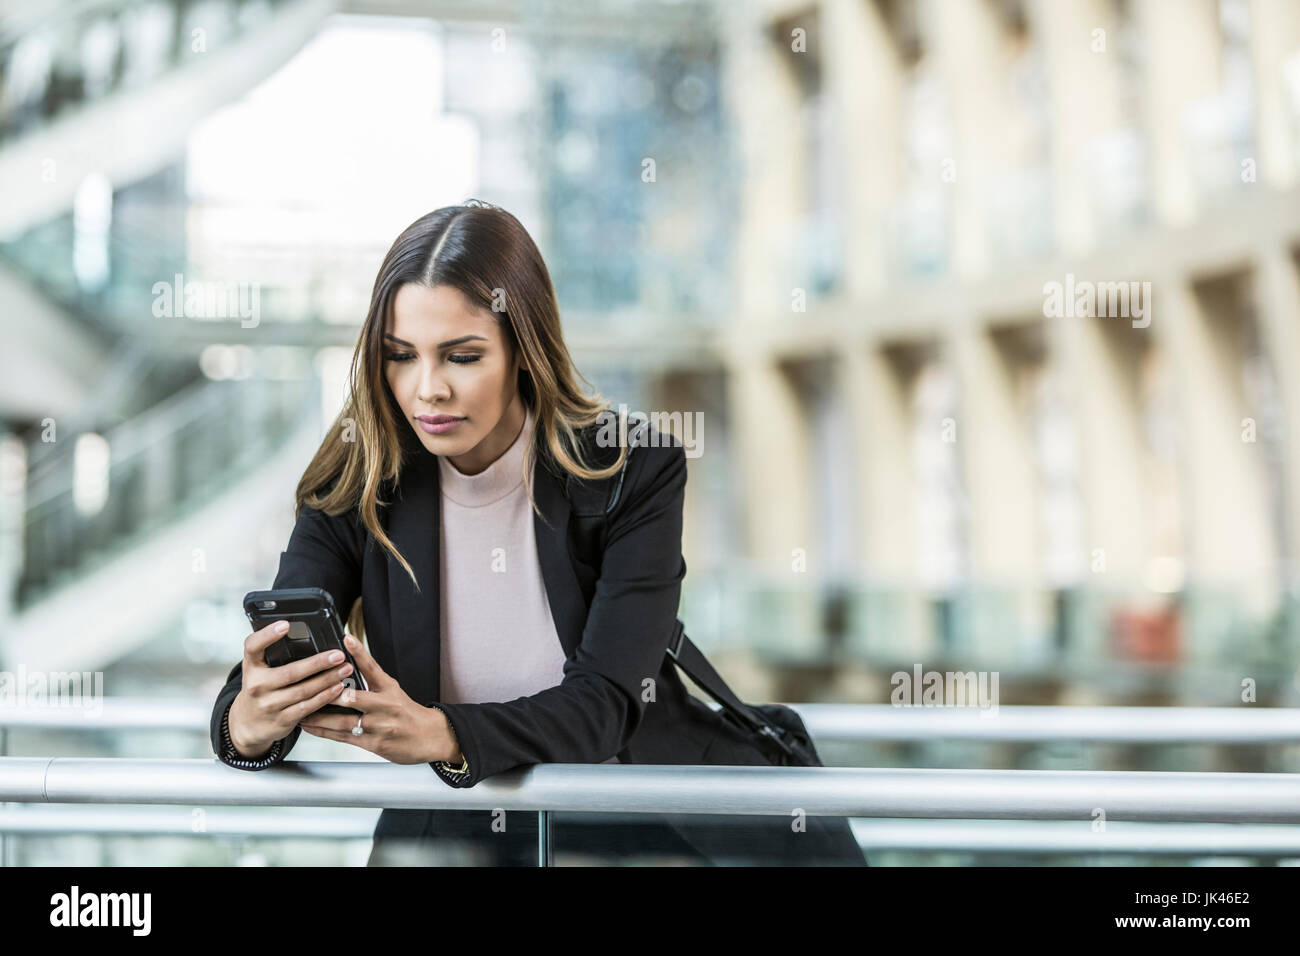 Mixed Race businesswoman texting on cell phone leaning on railing in lobby Stock Photo